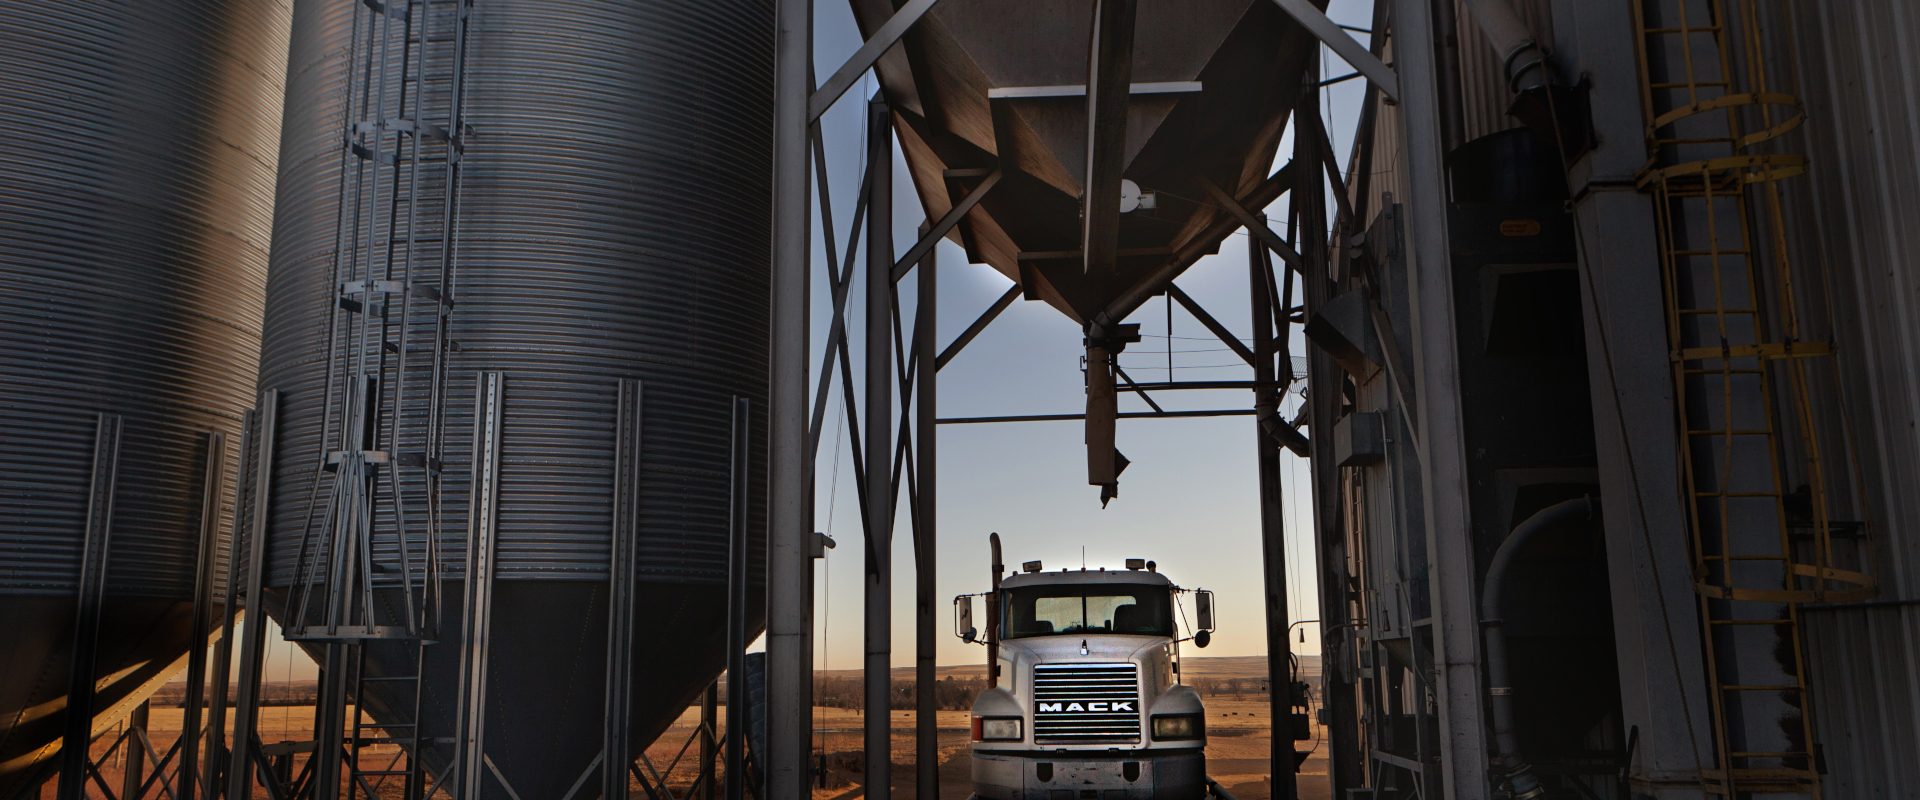 Grain being loaded into a truck